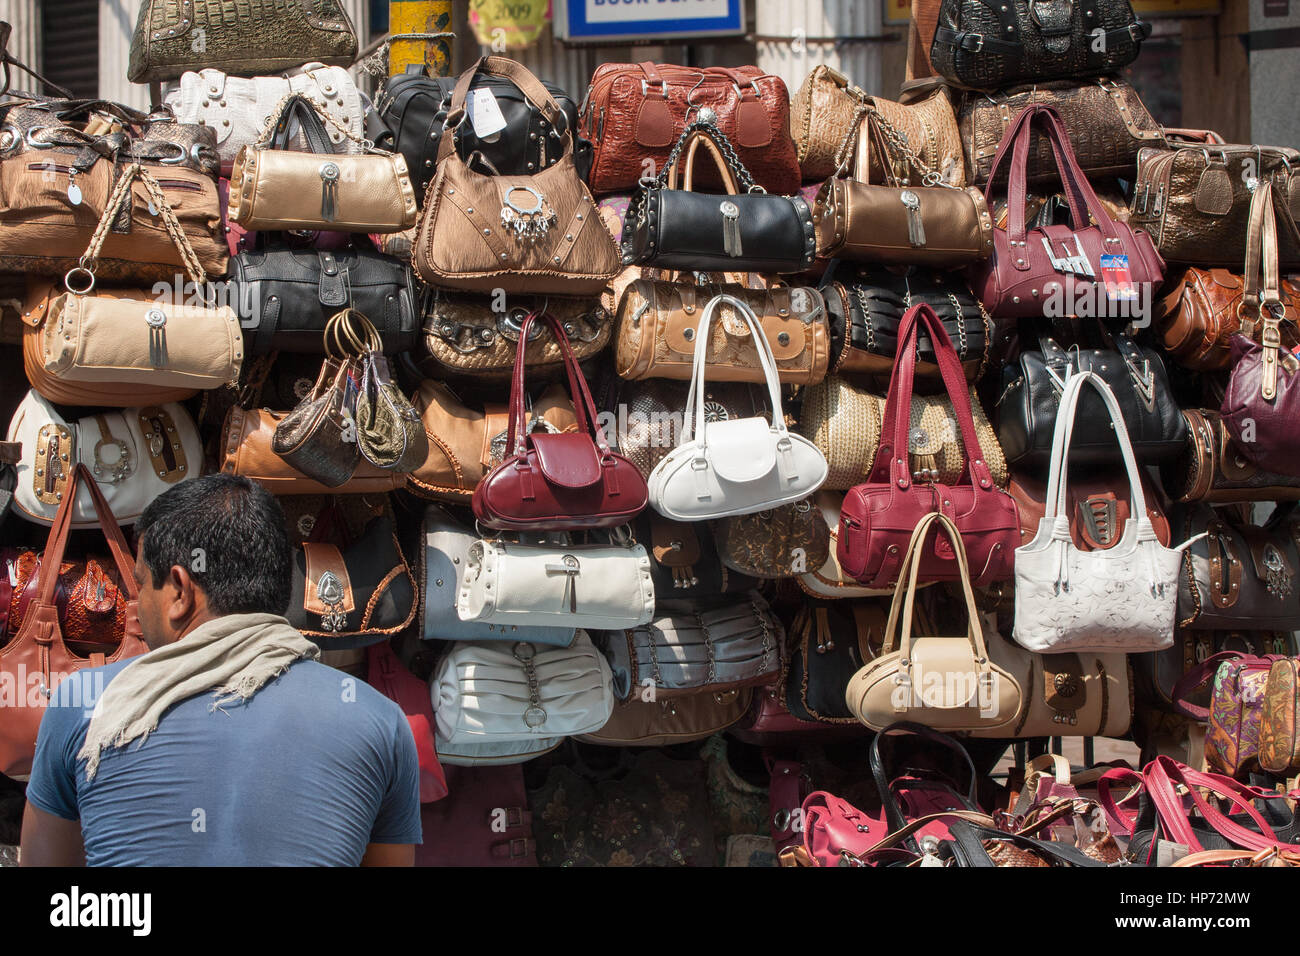 Stall Leather Handbags High Resolution Stock Photography and Images - Alamy